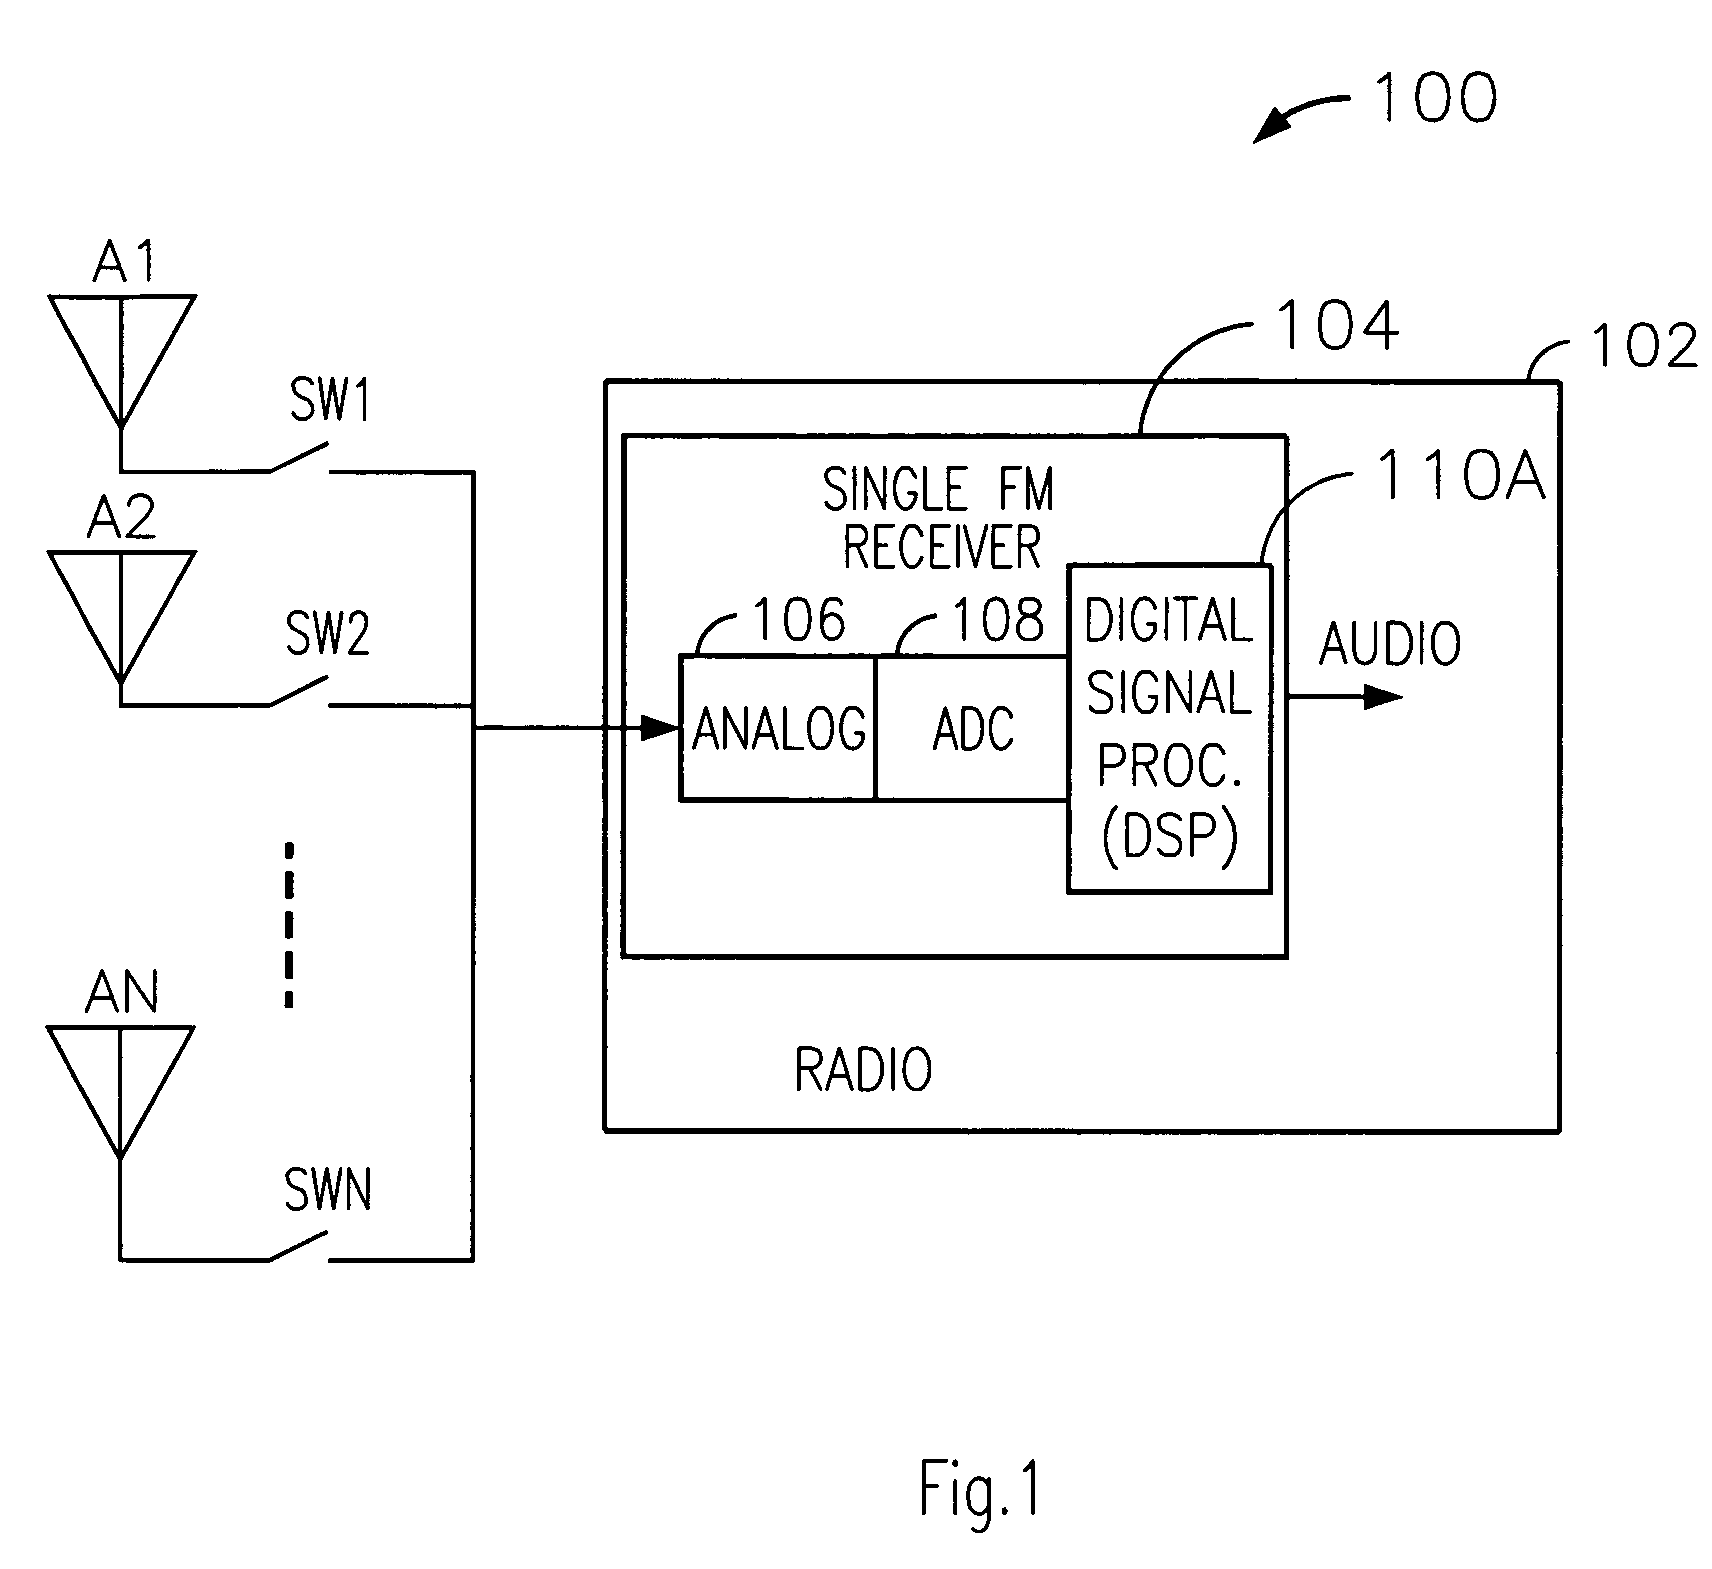 Technique for reducing multipath interference in an FM receiver